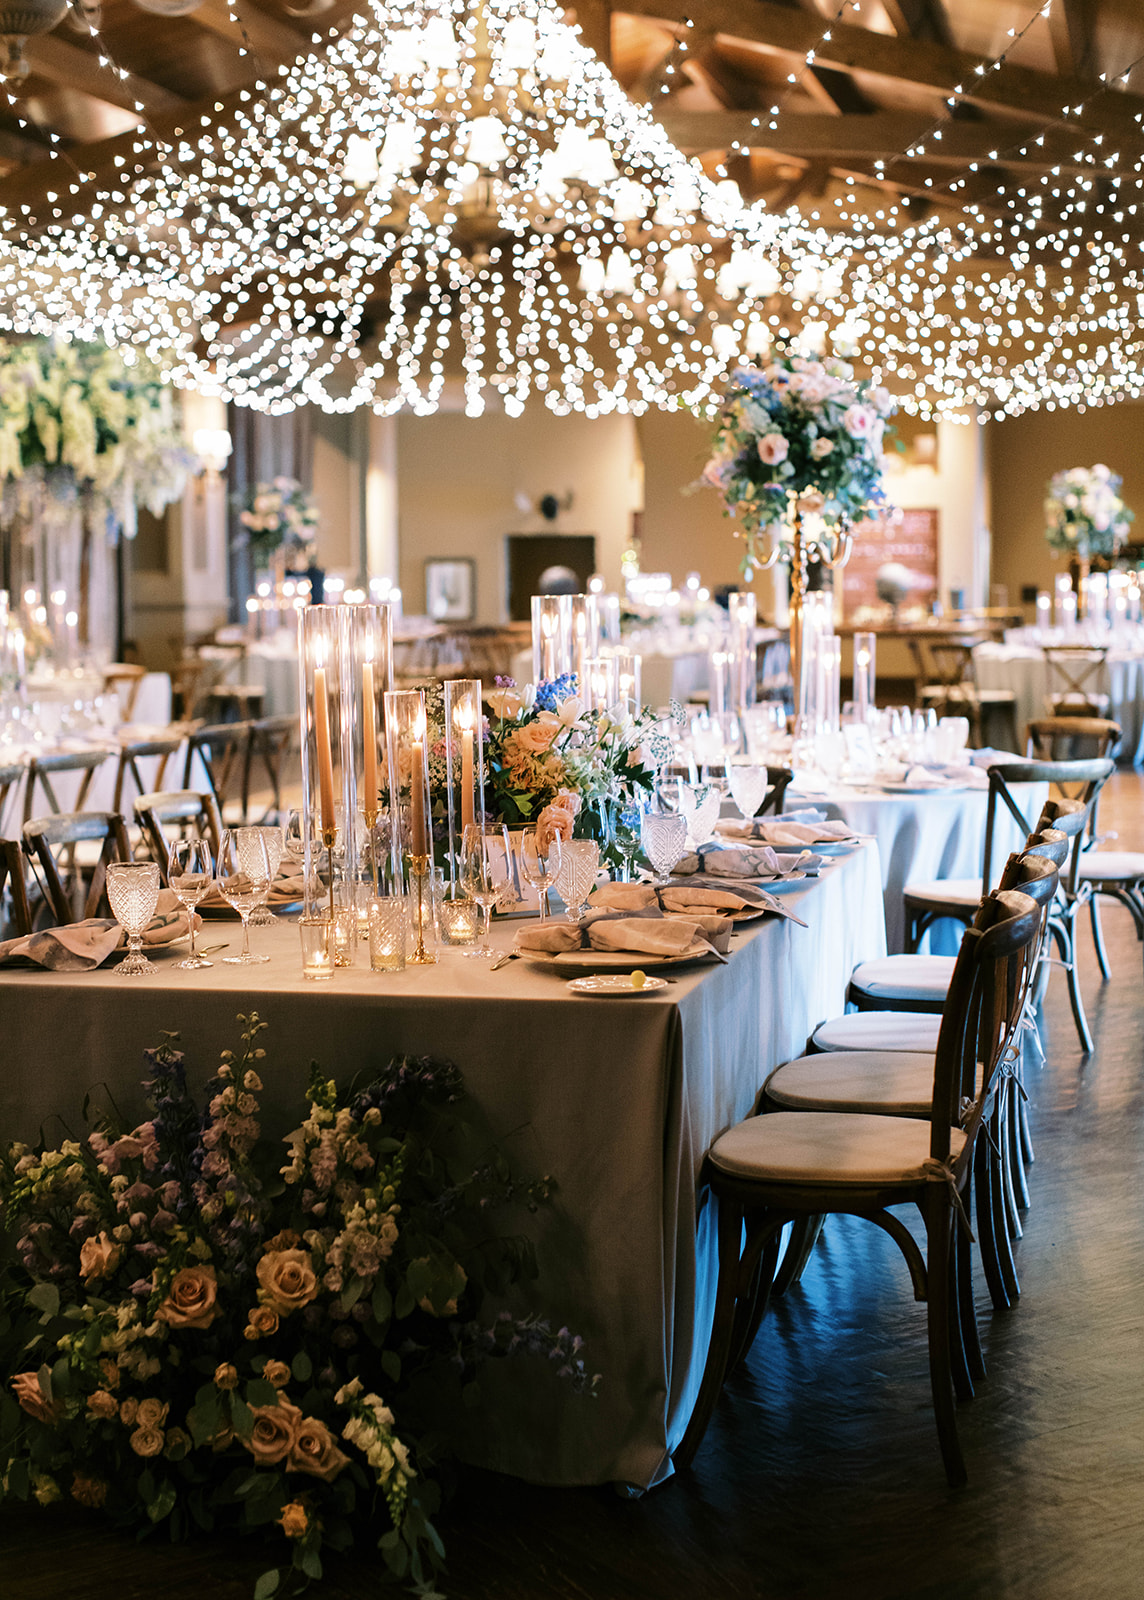 a wedding reception setup for a garden theme wedding at montage deer valley resort in park city utah. photo by megan robinson photography